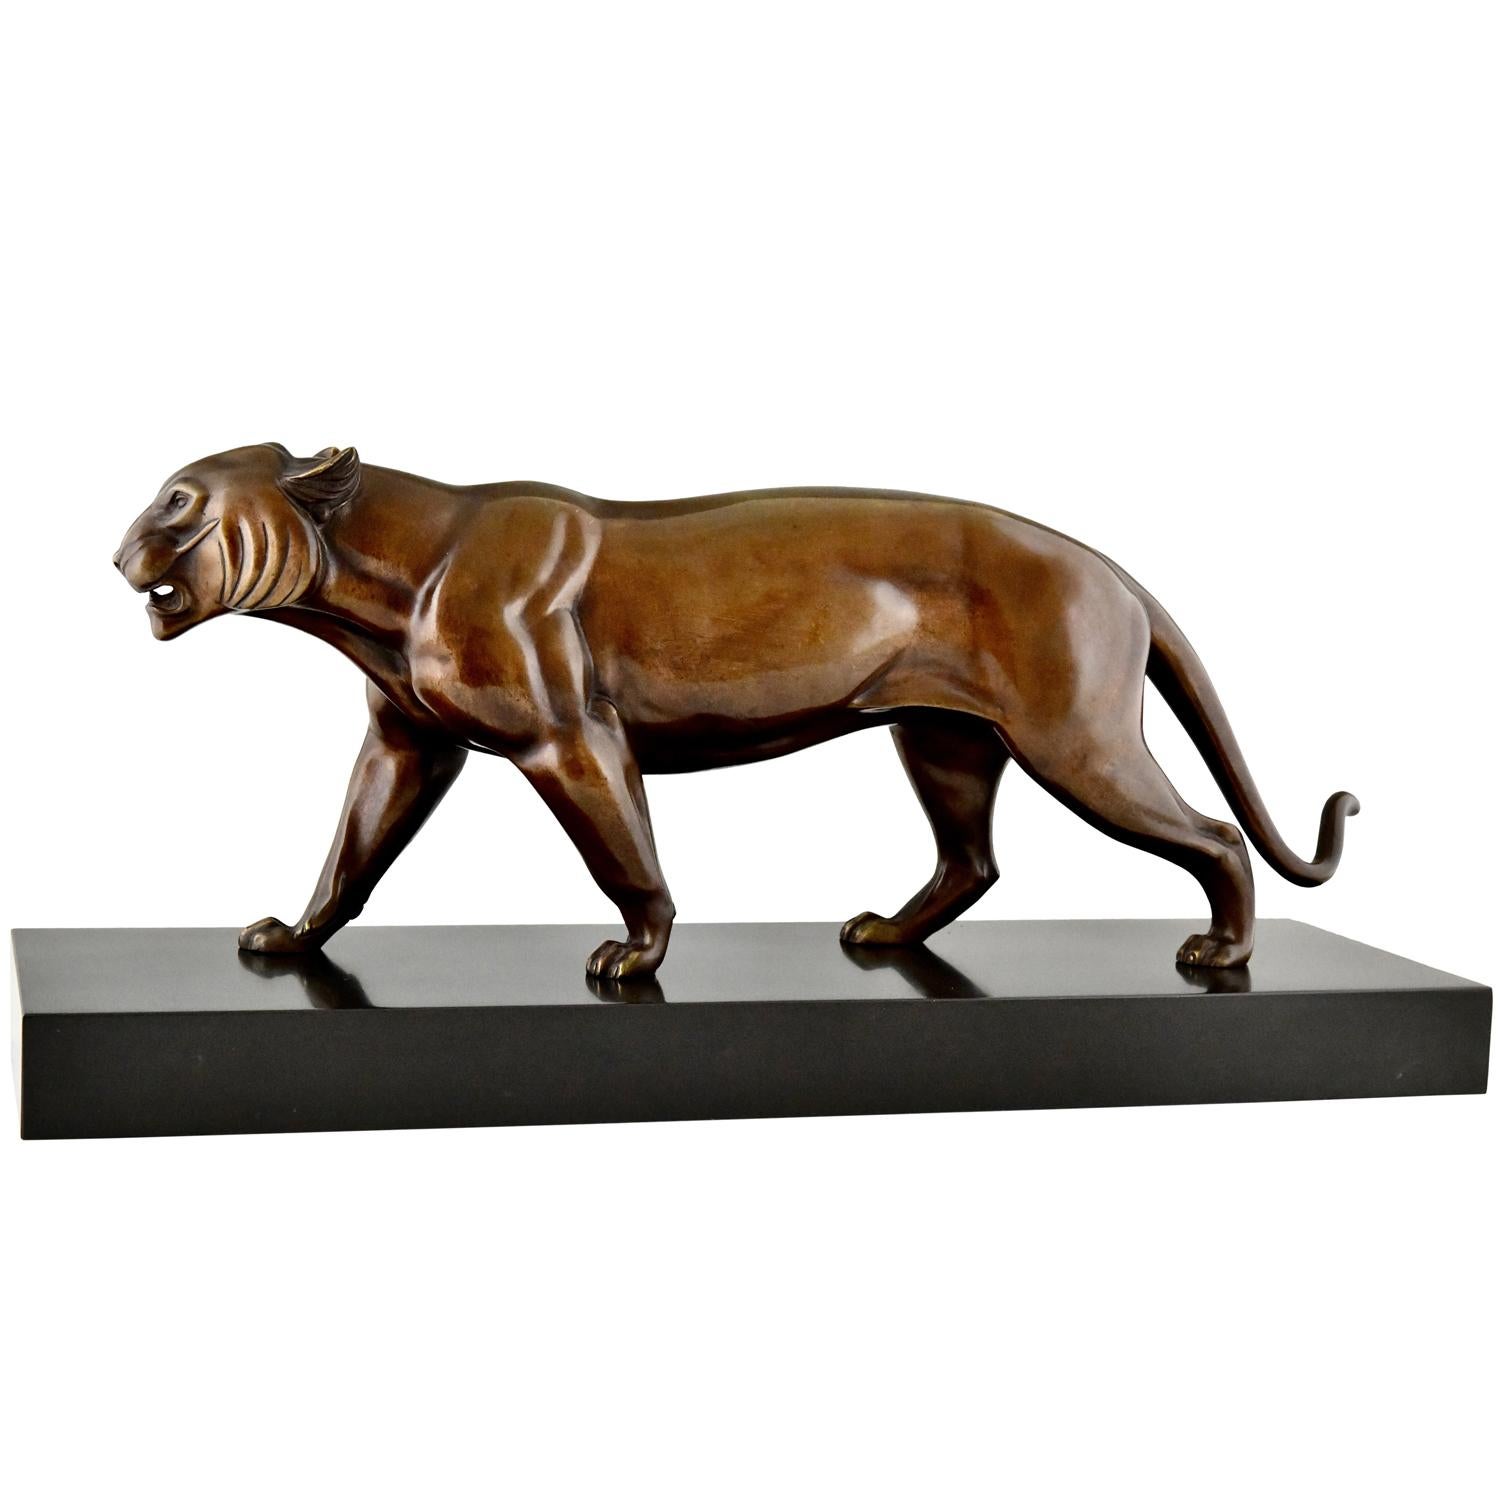 Art Deco sculpture of a bronze panther signed by Irenee Rochard.
The sculpture has a brown patina and stands on a Belgian Black marble base France ca. 1930
Literature:
Animals in bronze by Christopher Payne. Antique collectors club.
Dictionnaire des